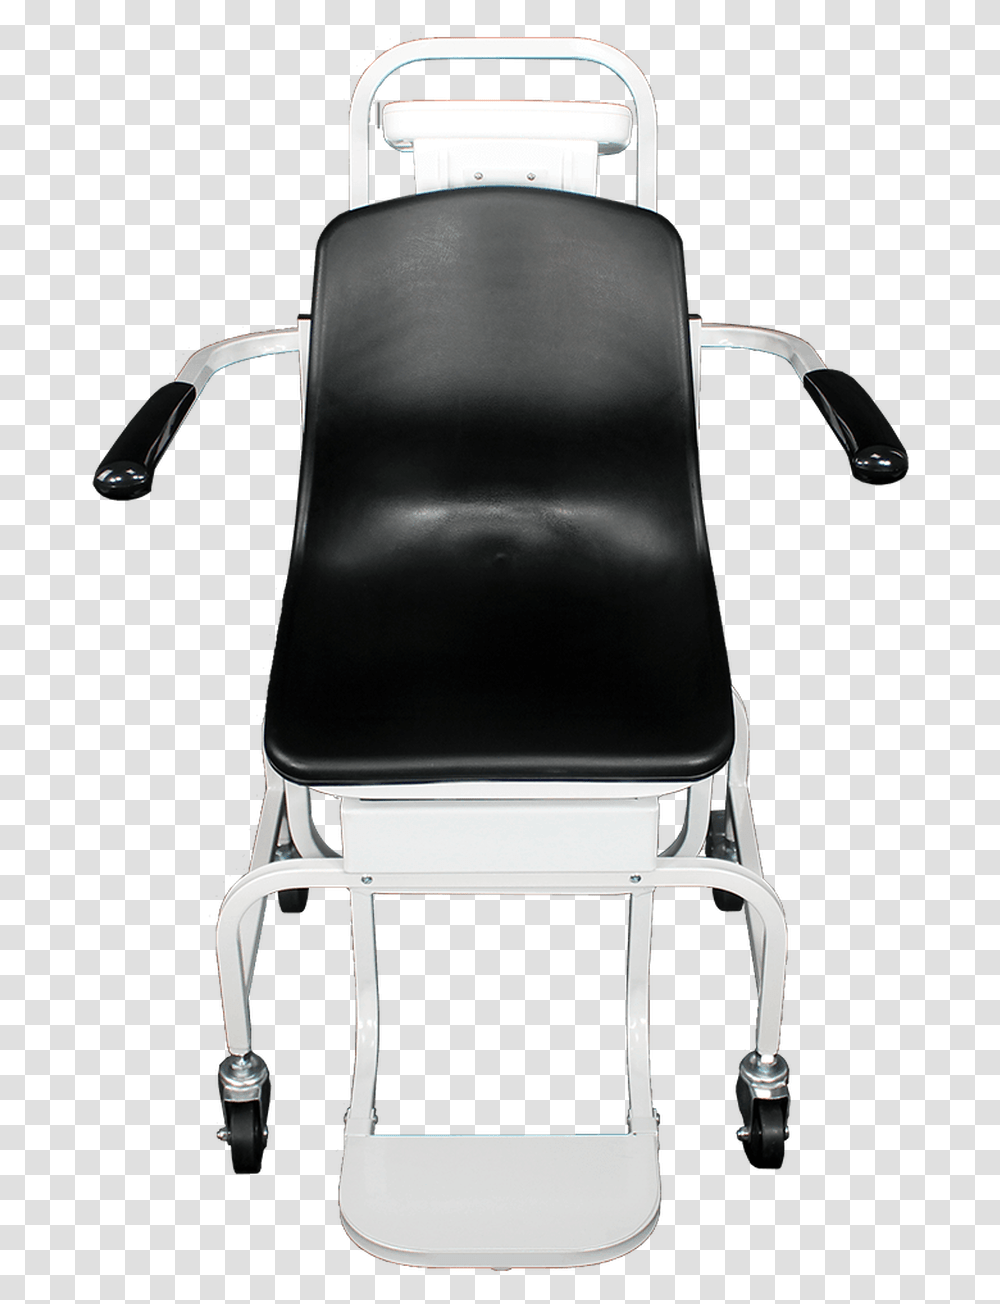 Adam Equipment Mcw 300l Chair Weighing Scale Front Barber Chair, Furniture, Mixer, Appliance, Armchair Transparent Png